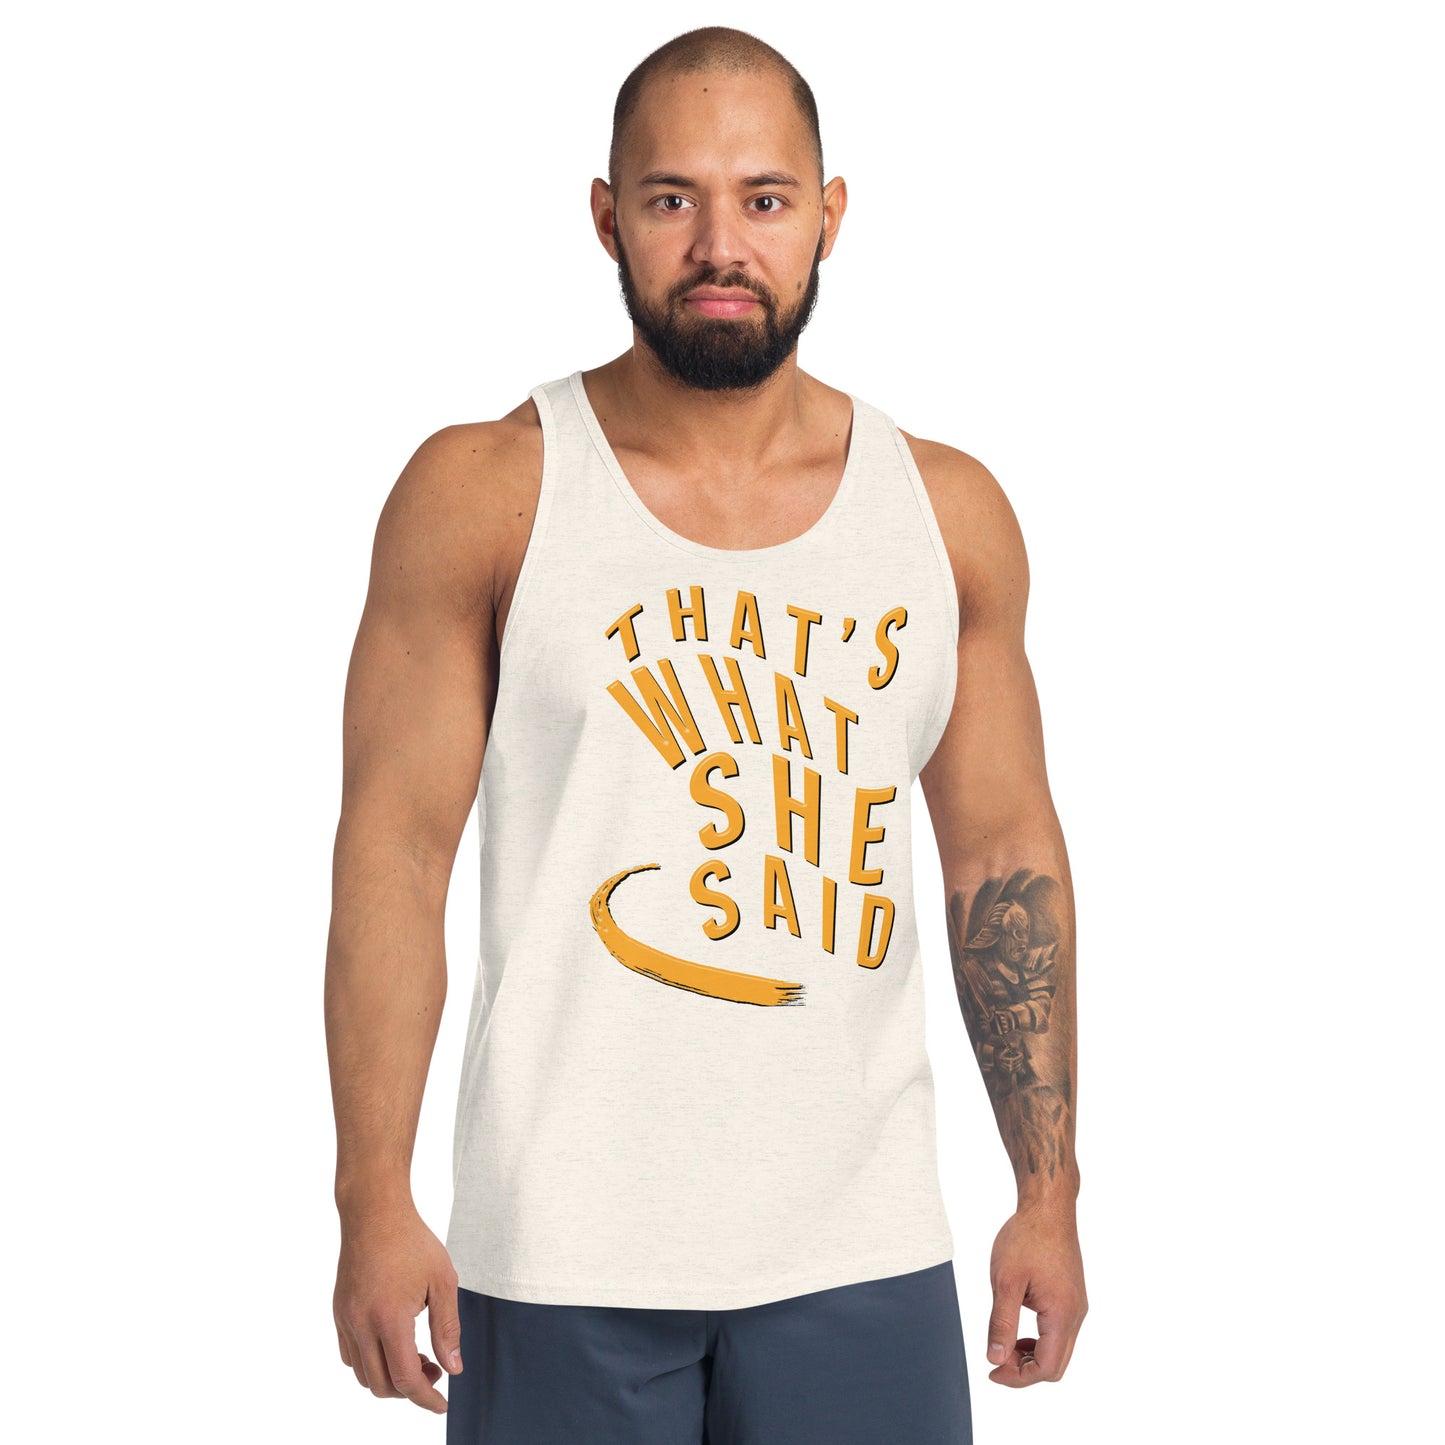 Tank Top - "That's What She Said"